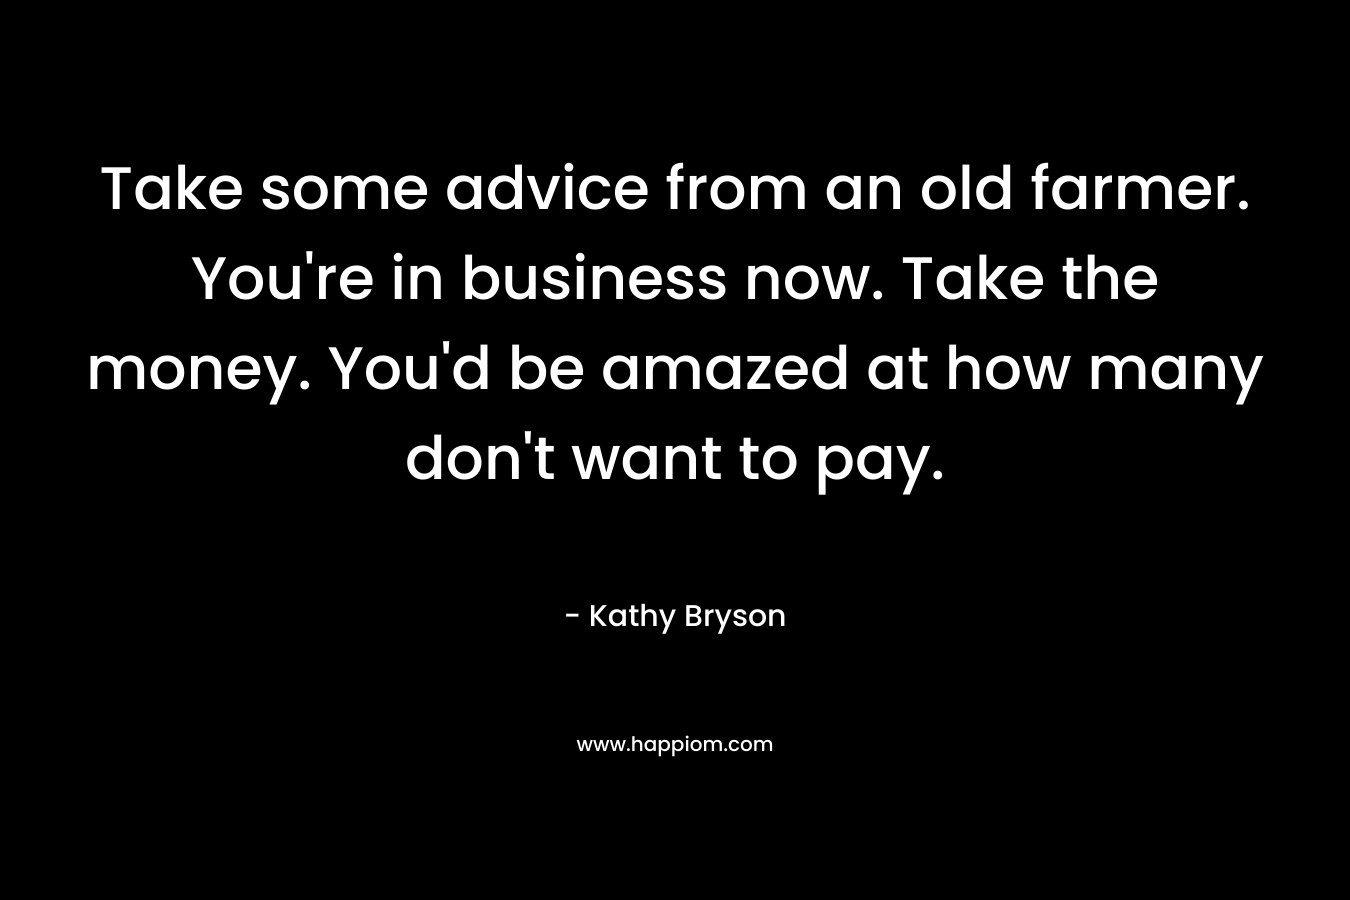 Take some advice from an old farmer. You're in business now. Take the money. You'd be amazed at how many don't want to pay.